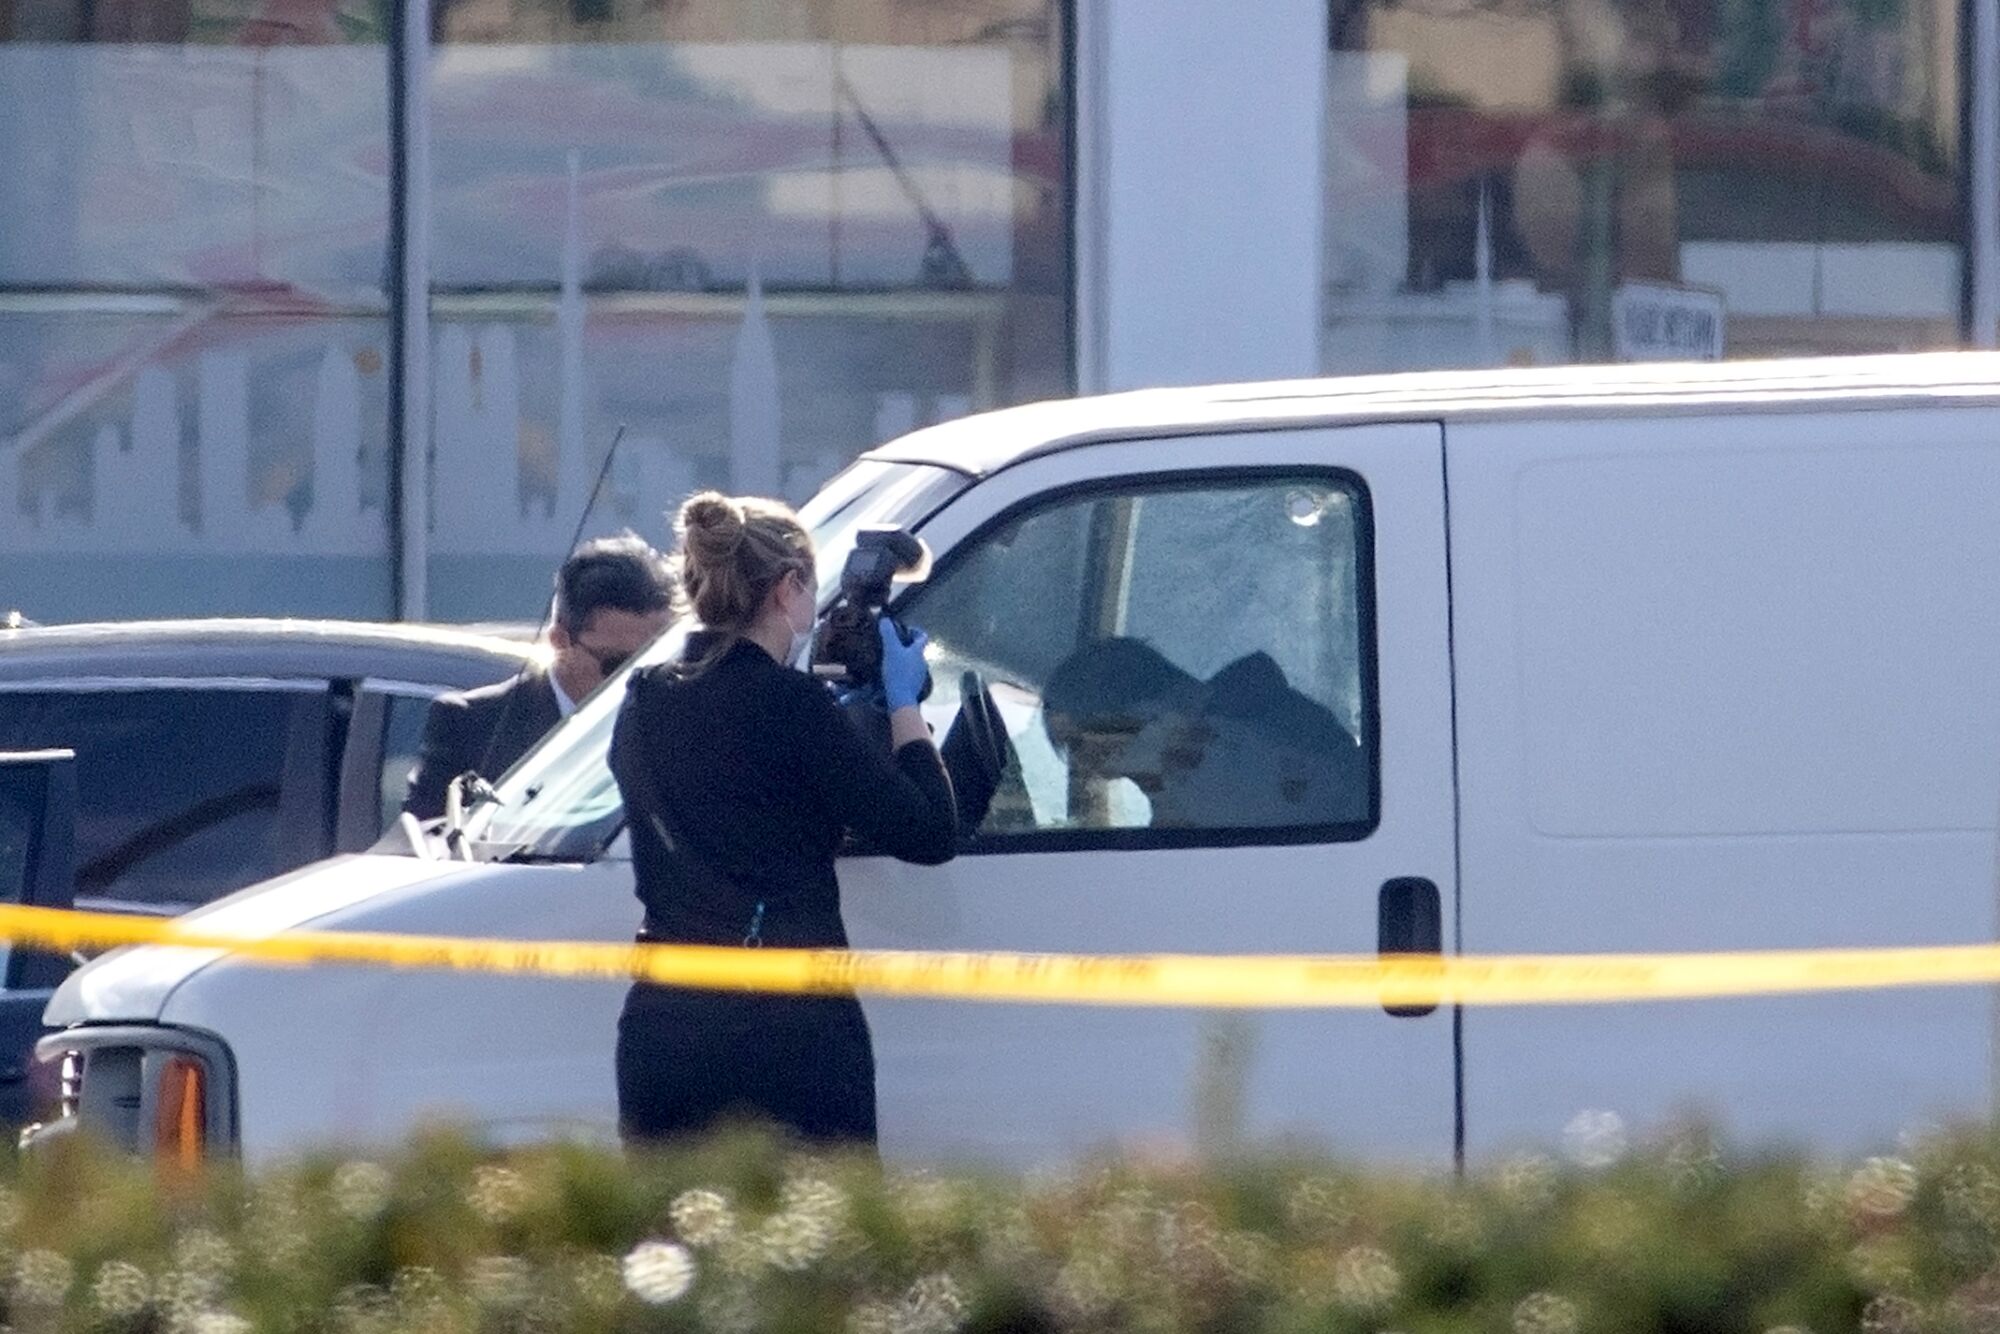 A coroner official takes photos of a man slumped over the steering wheel of a white van.